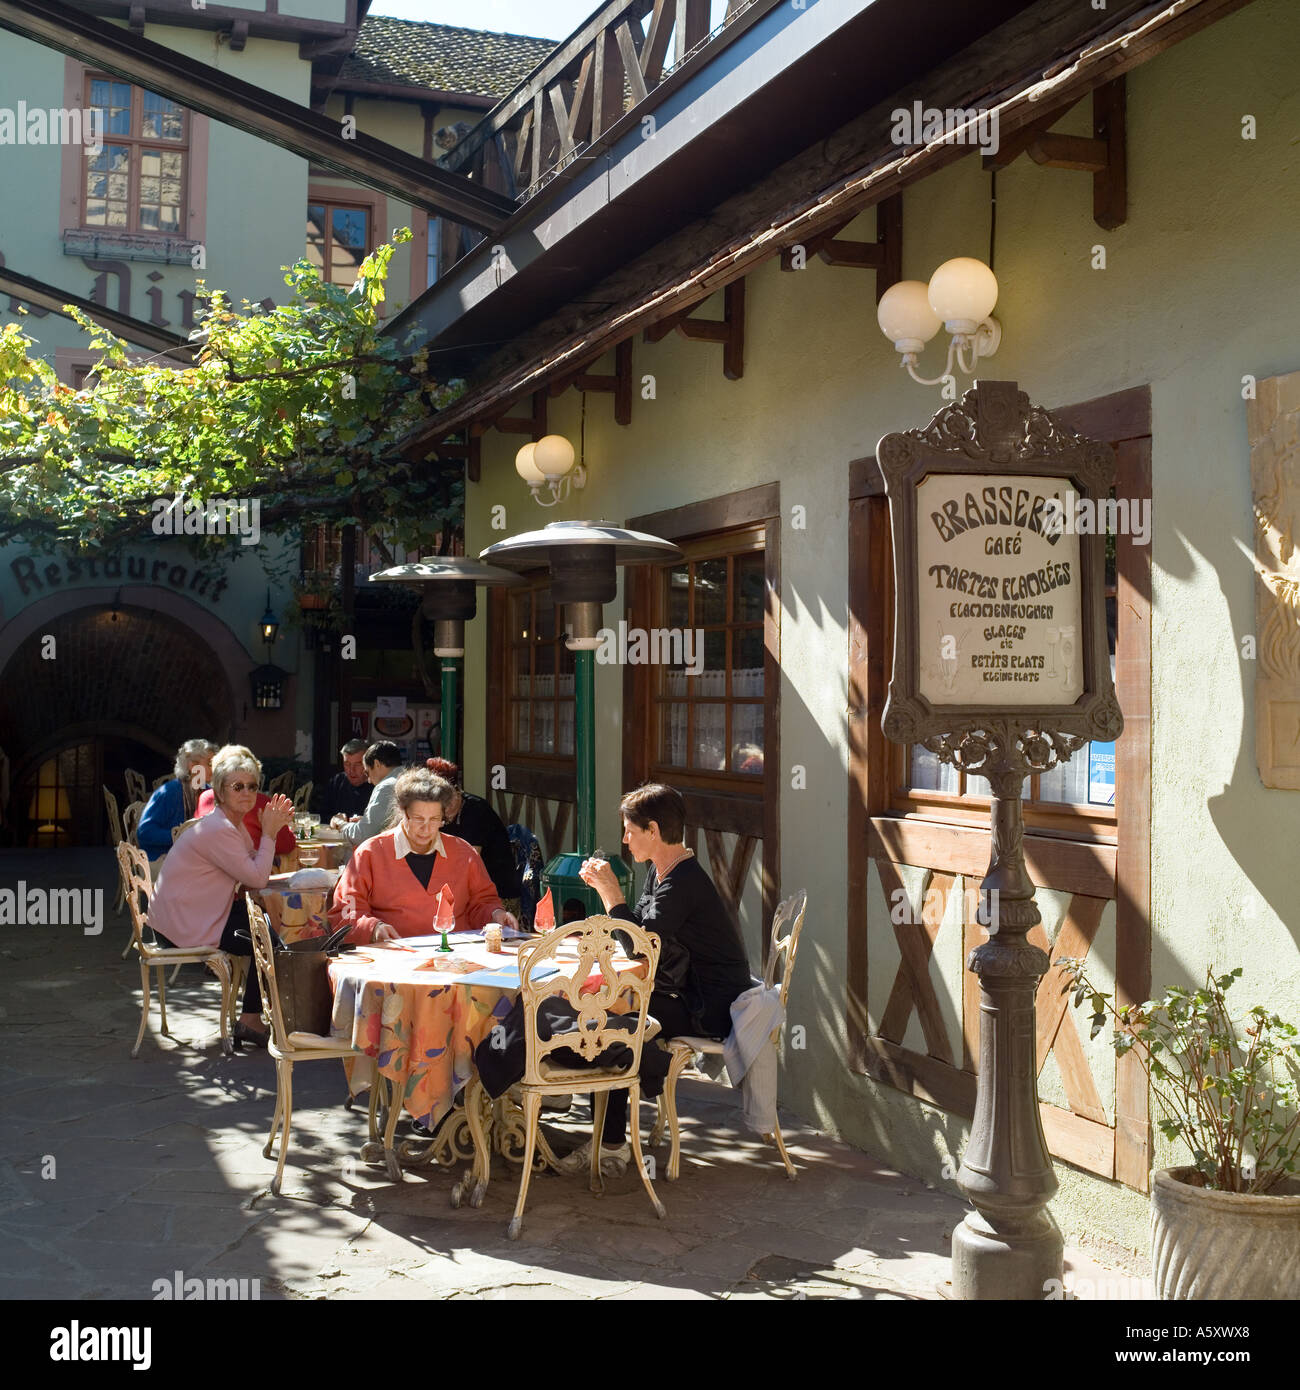 Sunny restaurant terrace in a courtyard, Riquewihr, Alsace, France Stock Photo